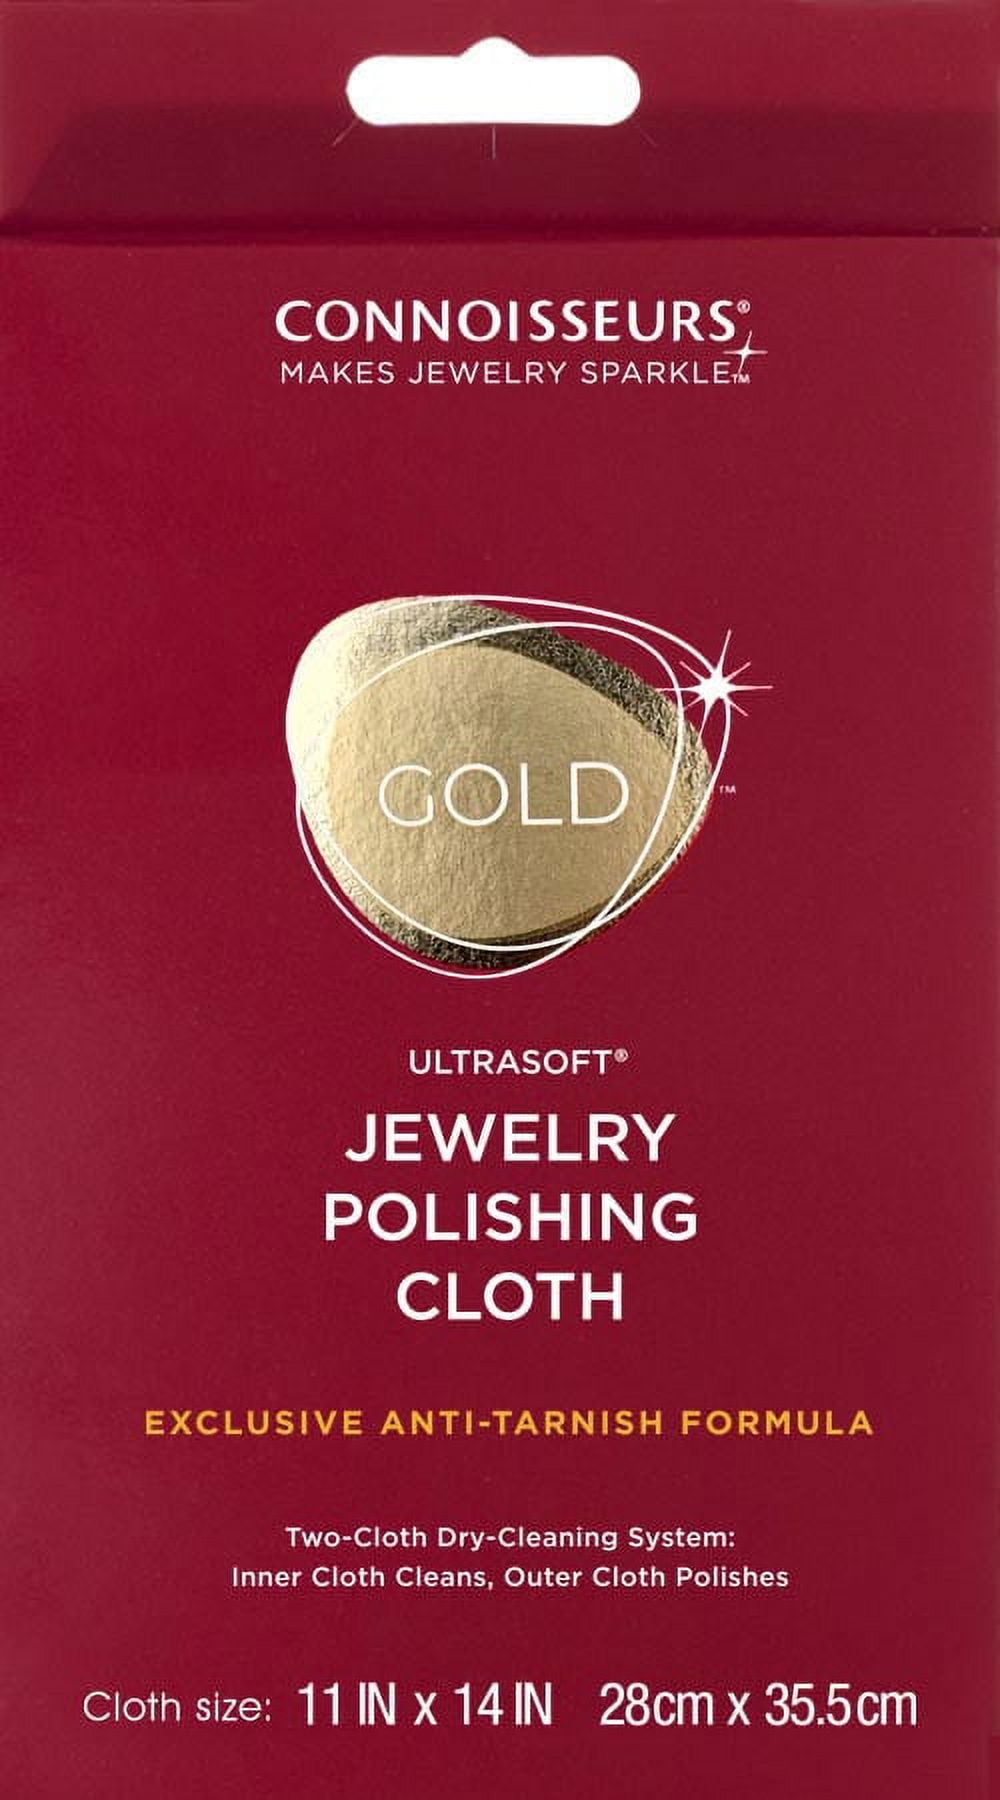 CONNOISSEURS Polishing Cloth For Gold - Made in USA